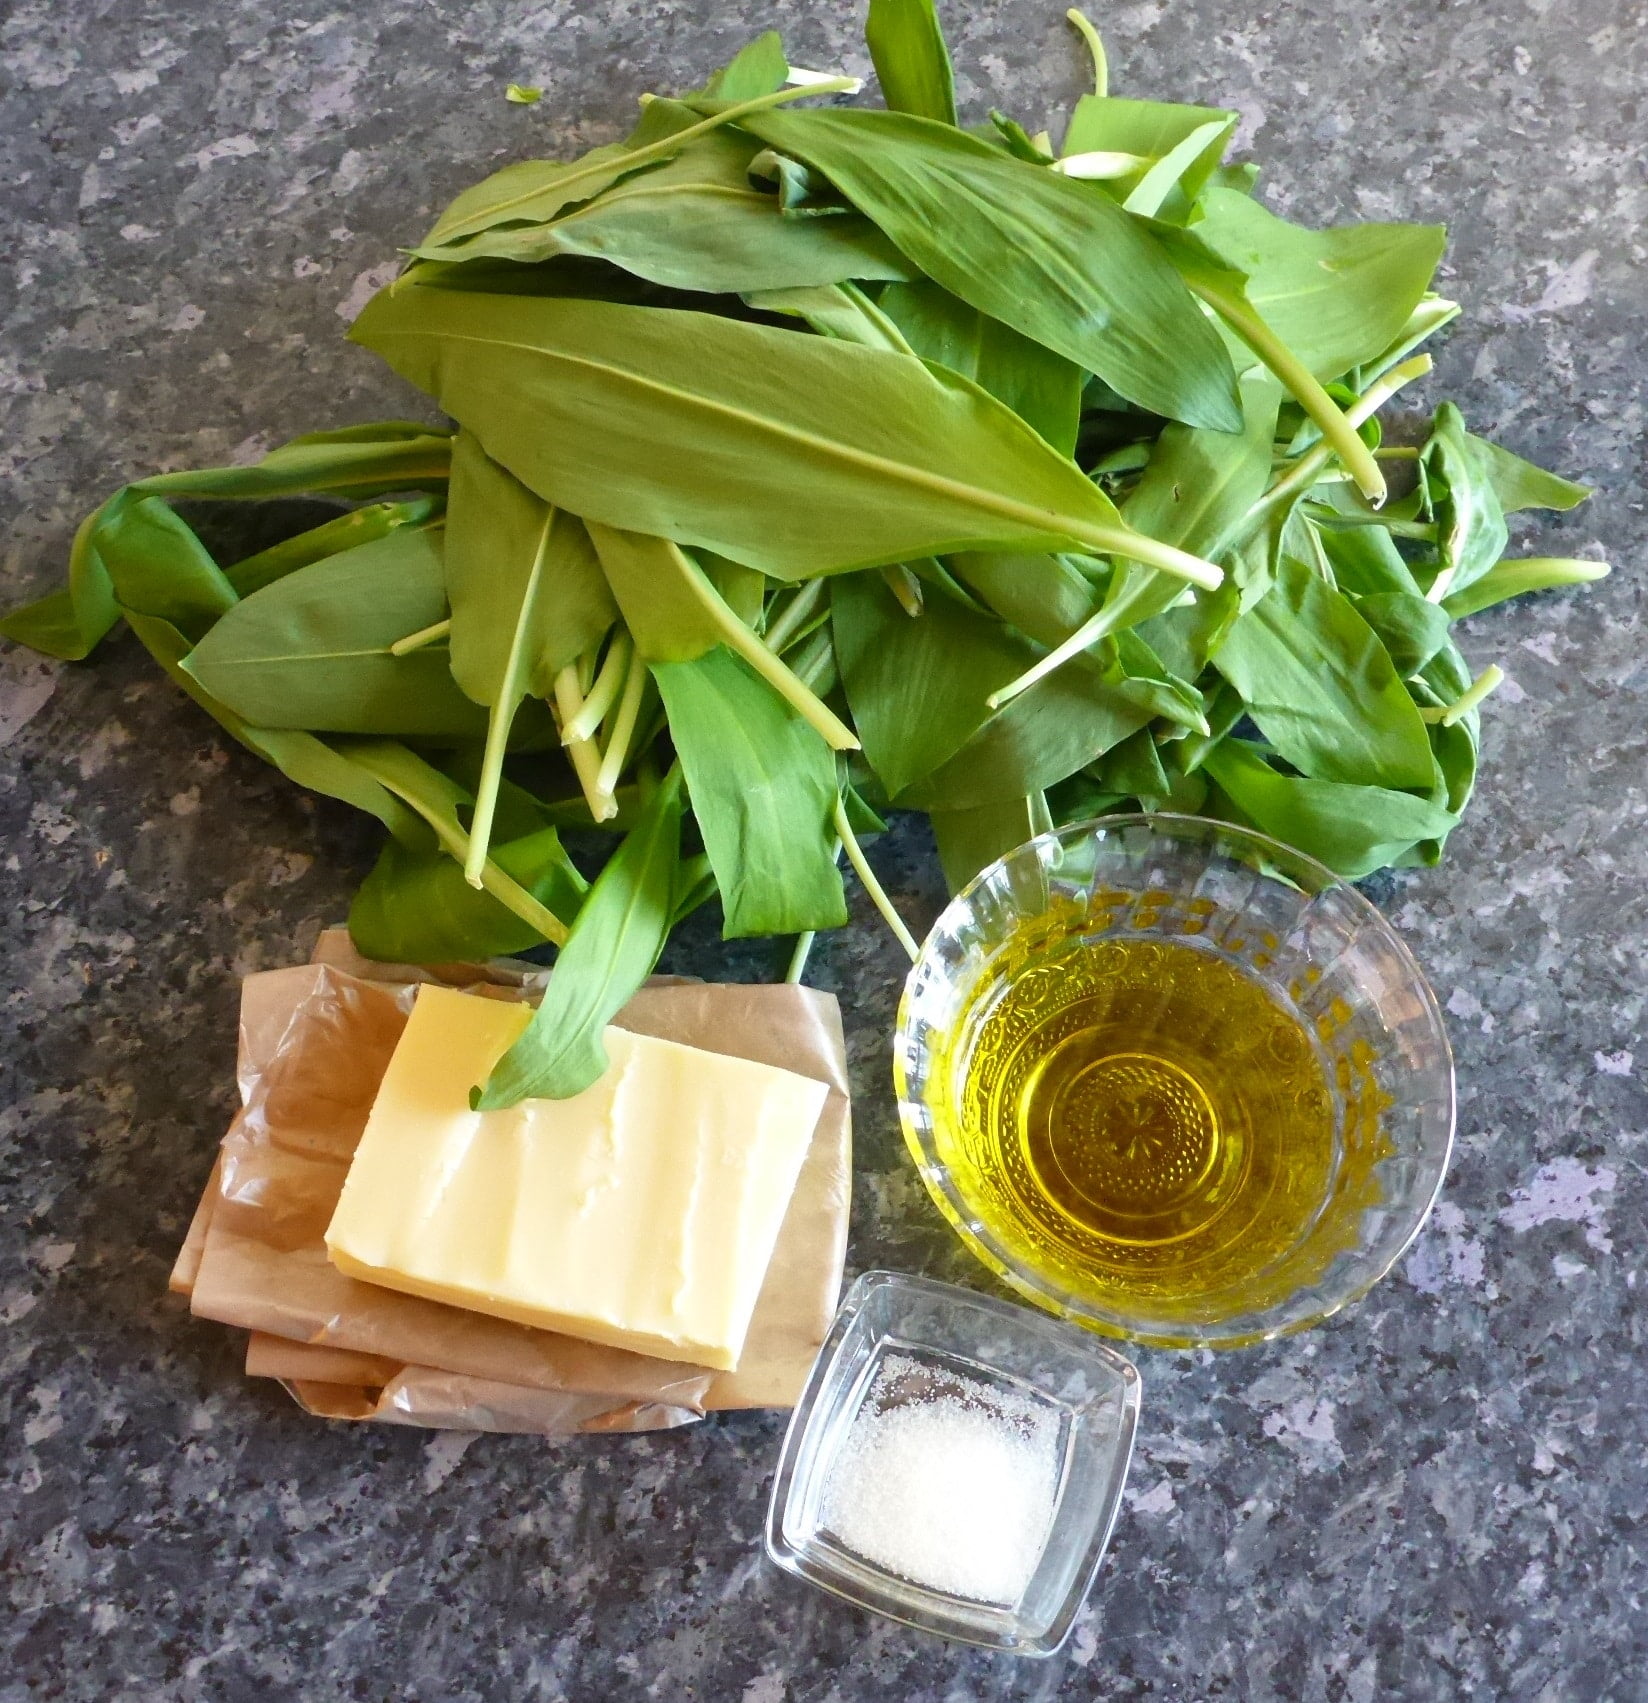 Ingredients for flavor-packed wild garlic, cheese, and olive oil mixture: fresh wild garlic leaves, olive oil, salt and cheese.